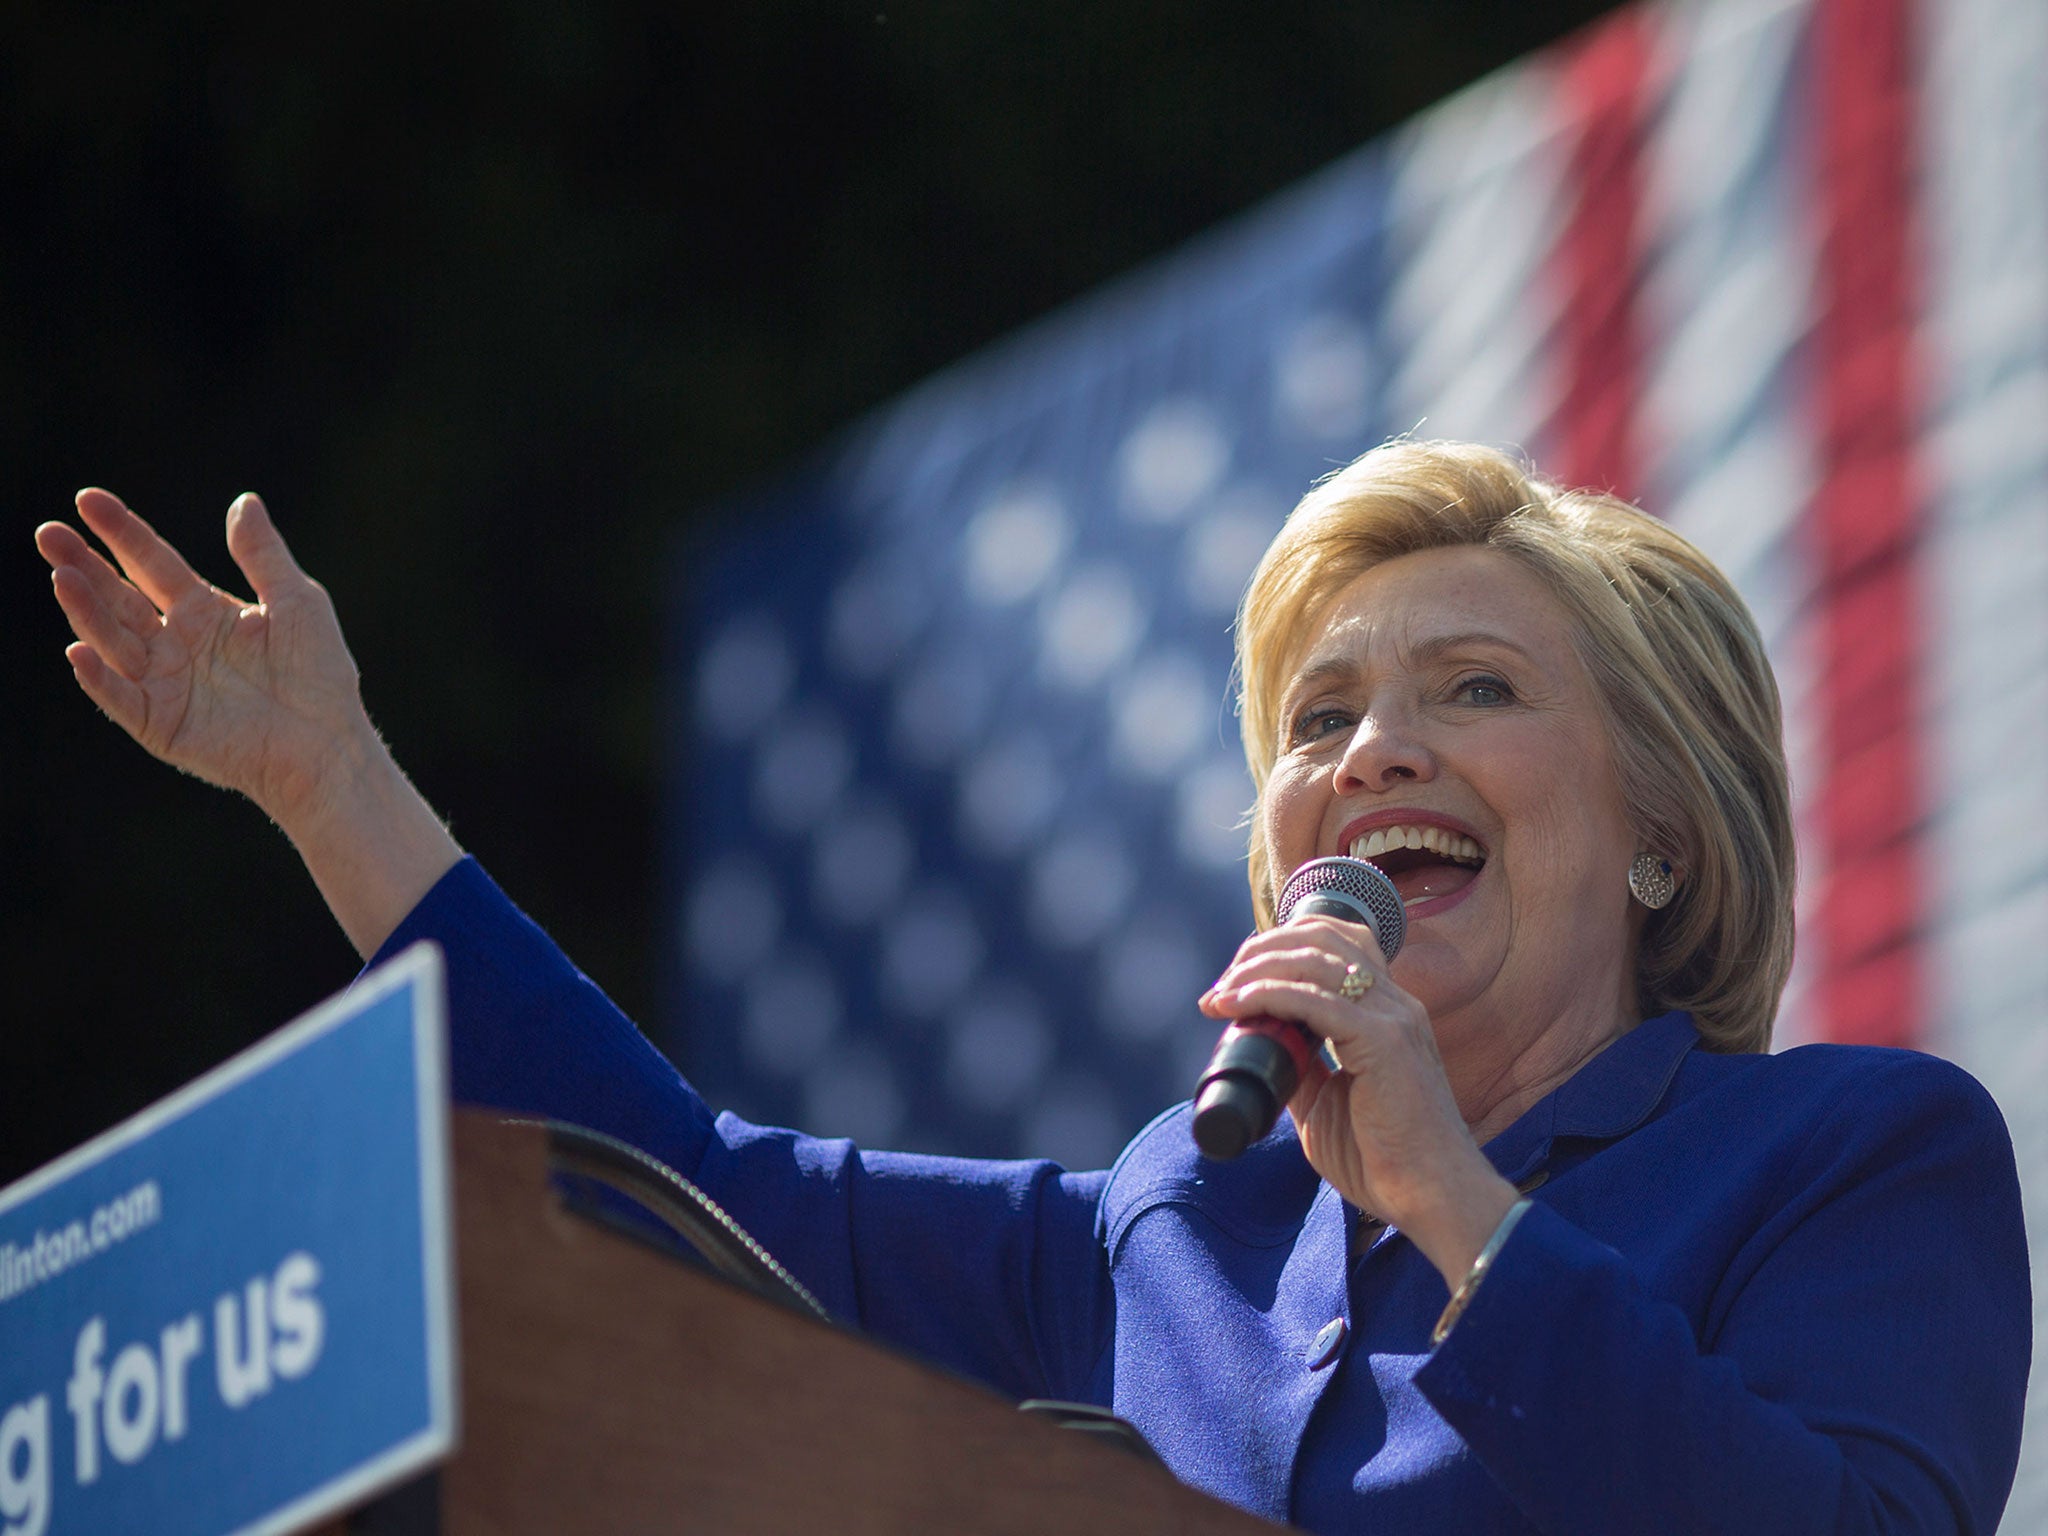 Hillary Clinton campaigned on Monday, which is set to vote on Tuesday with five other states